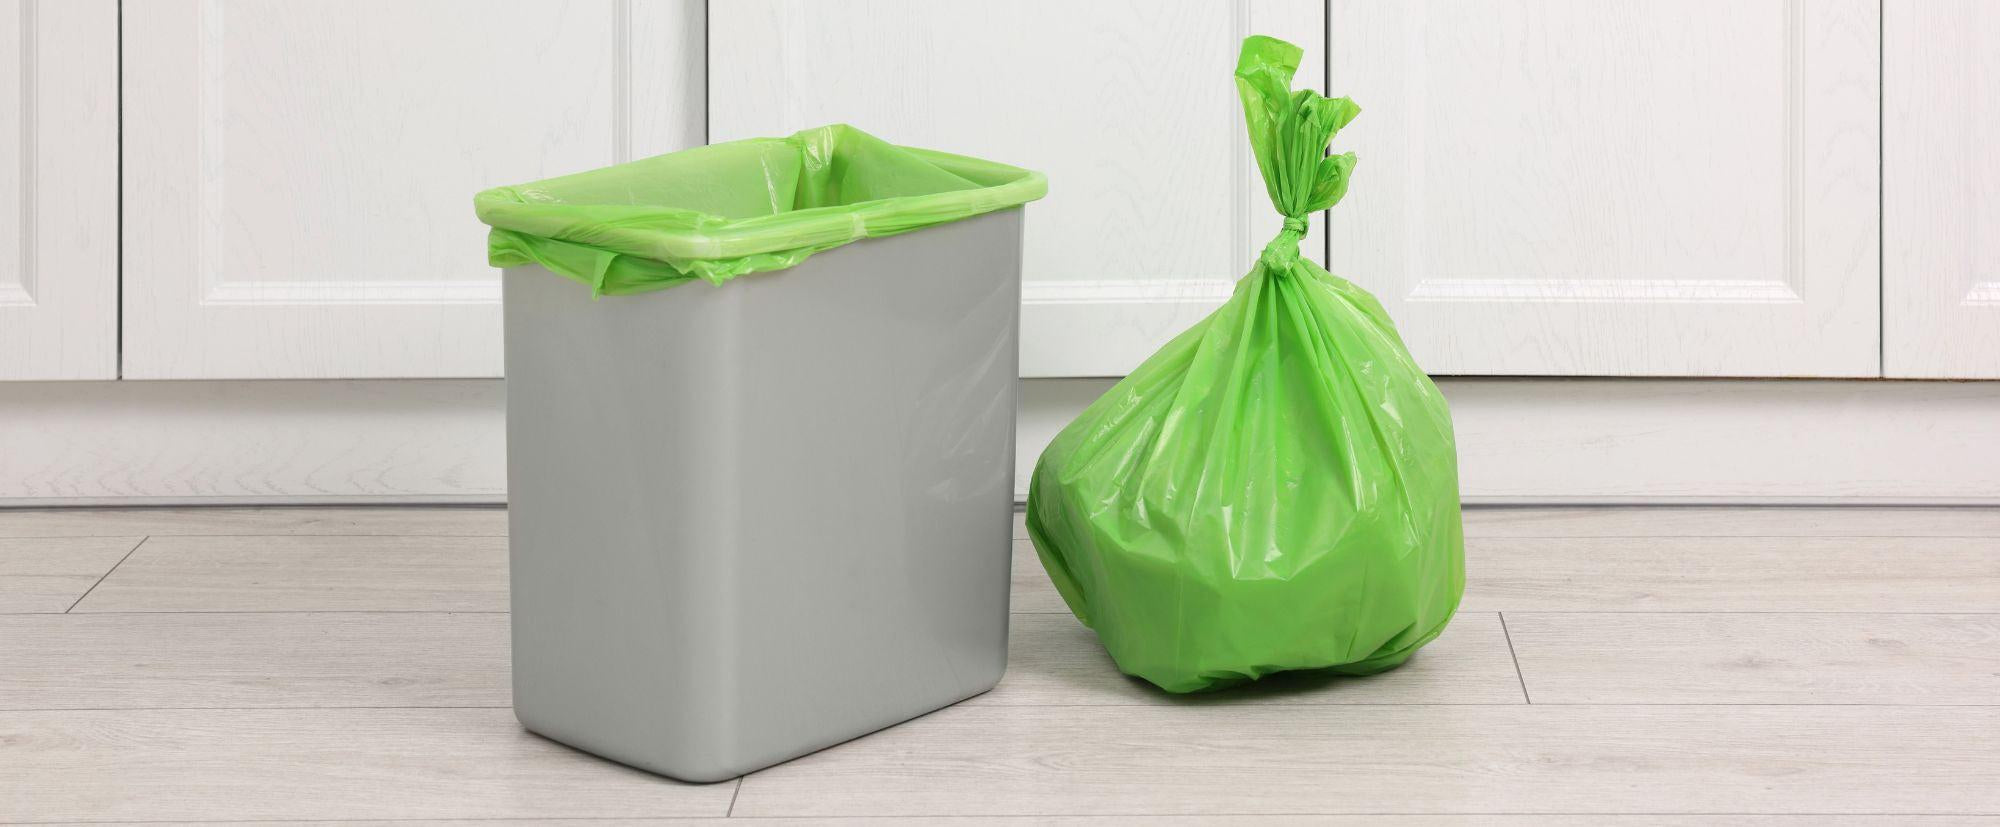 Greener Choices: The Clear Case for Biodegradable Bags